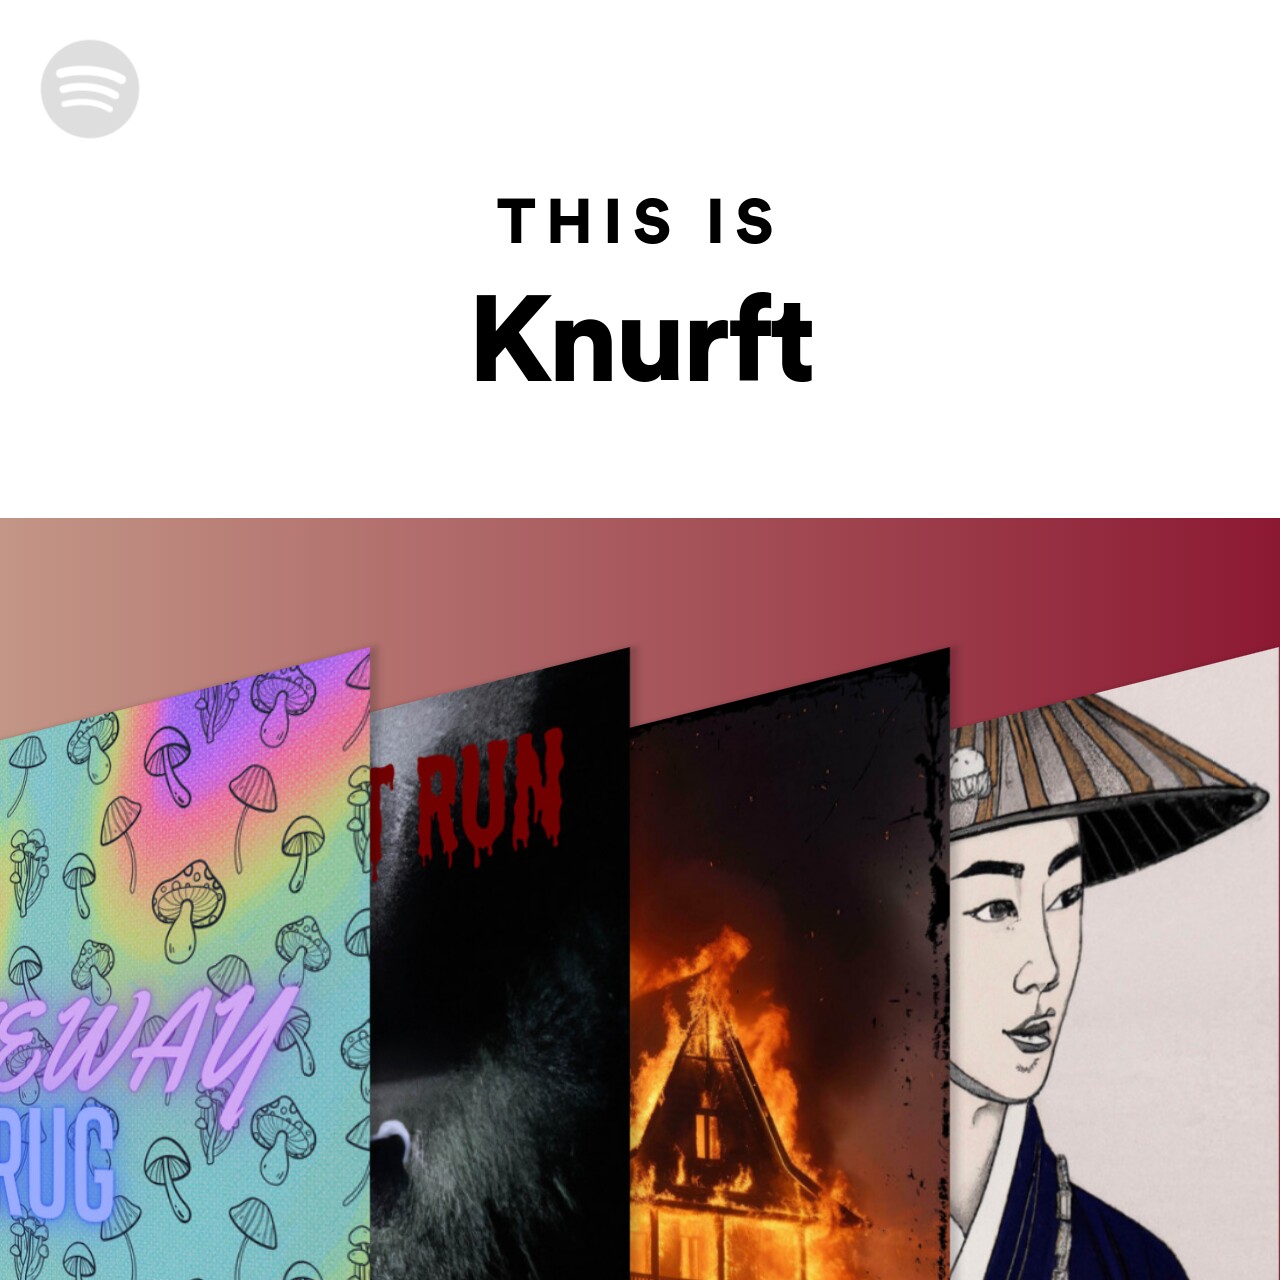 This Is Knurft